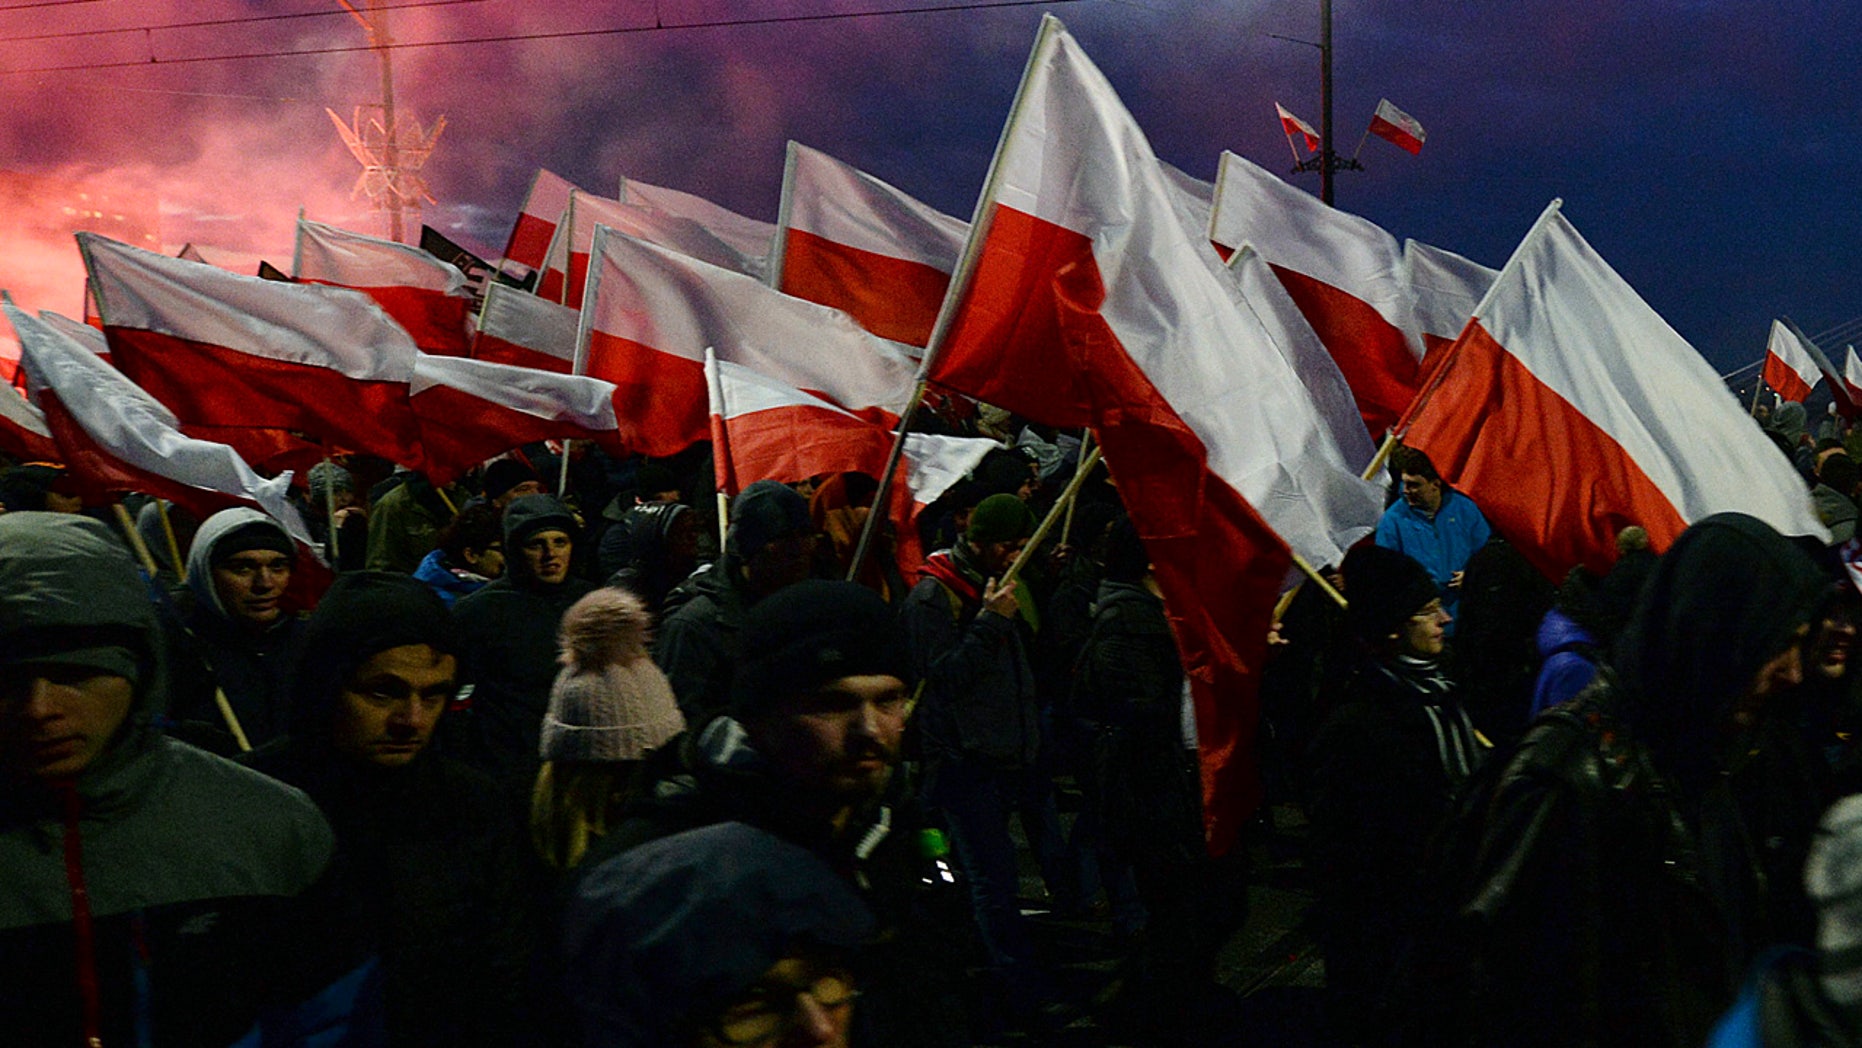 Farright march on Poland's Independence Day draws 60,000 Fox News